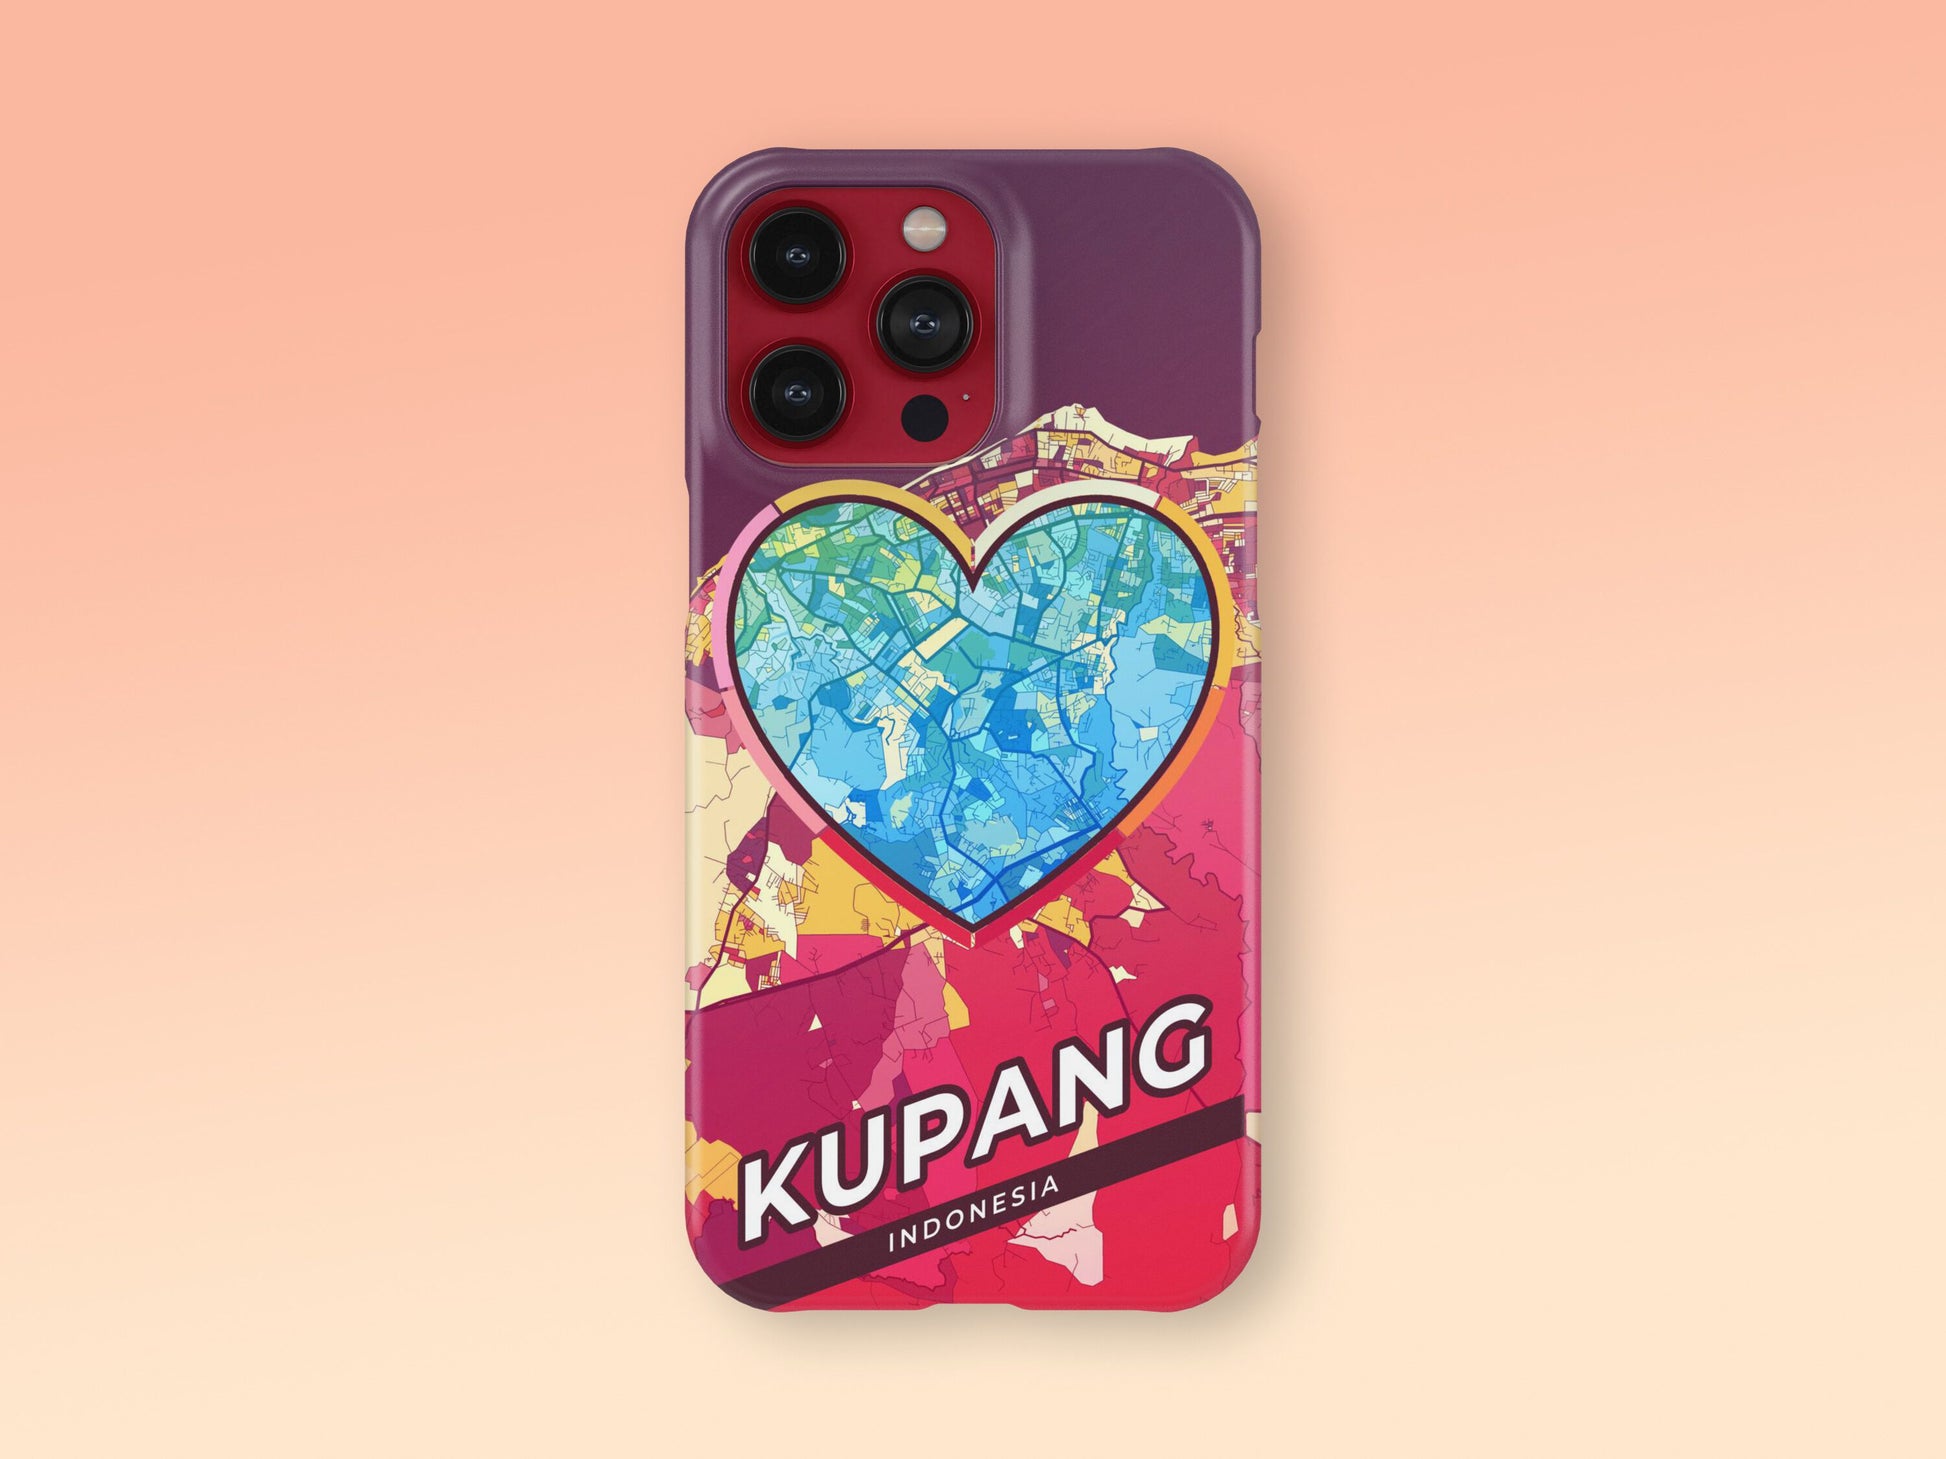 Kupang Indonesia slim phone case with colorful icon. Birthday, wedding or housewarming gift. Couple match cases. 2